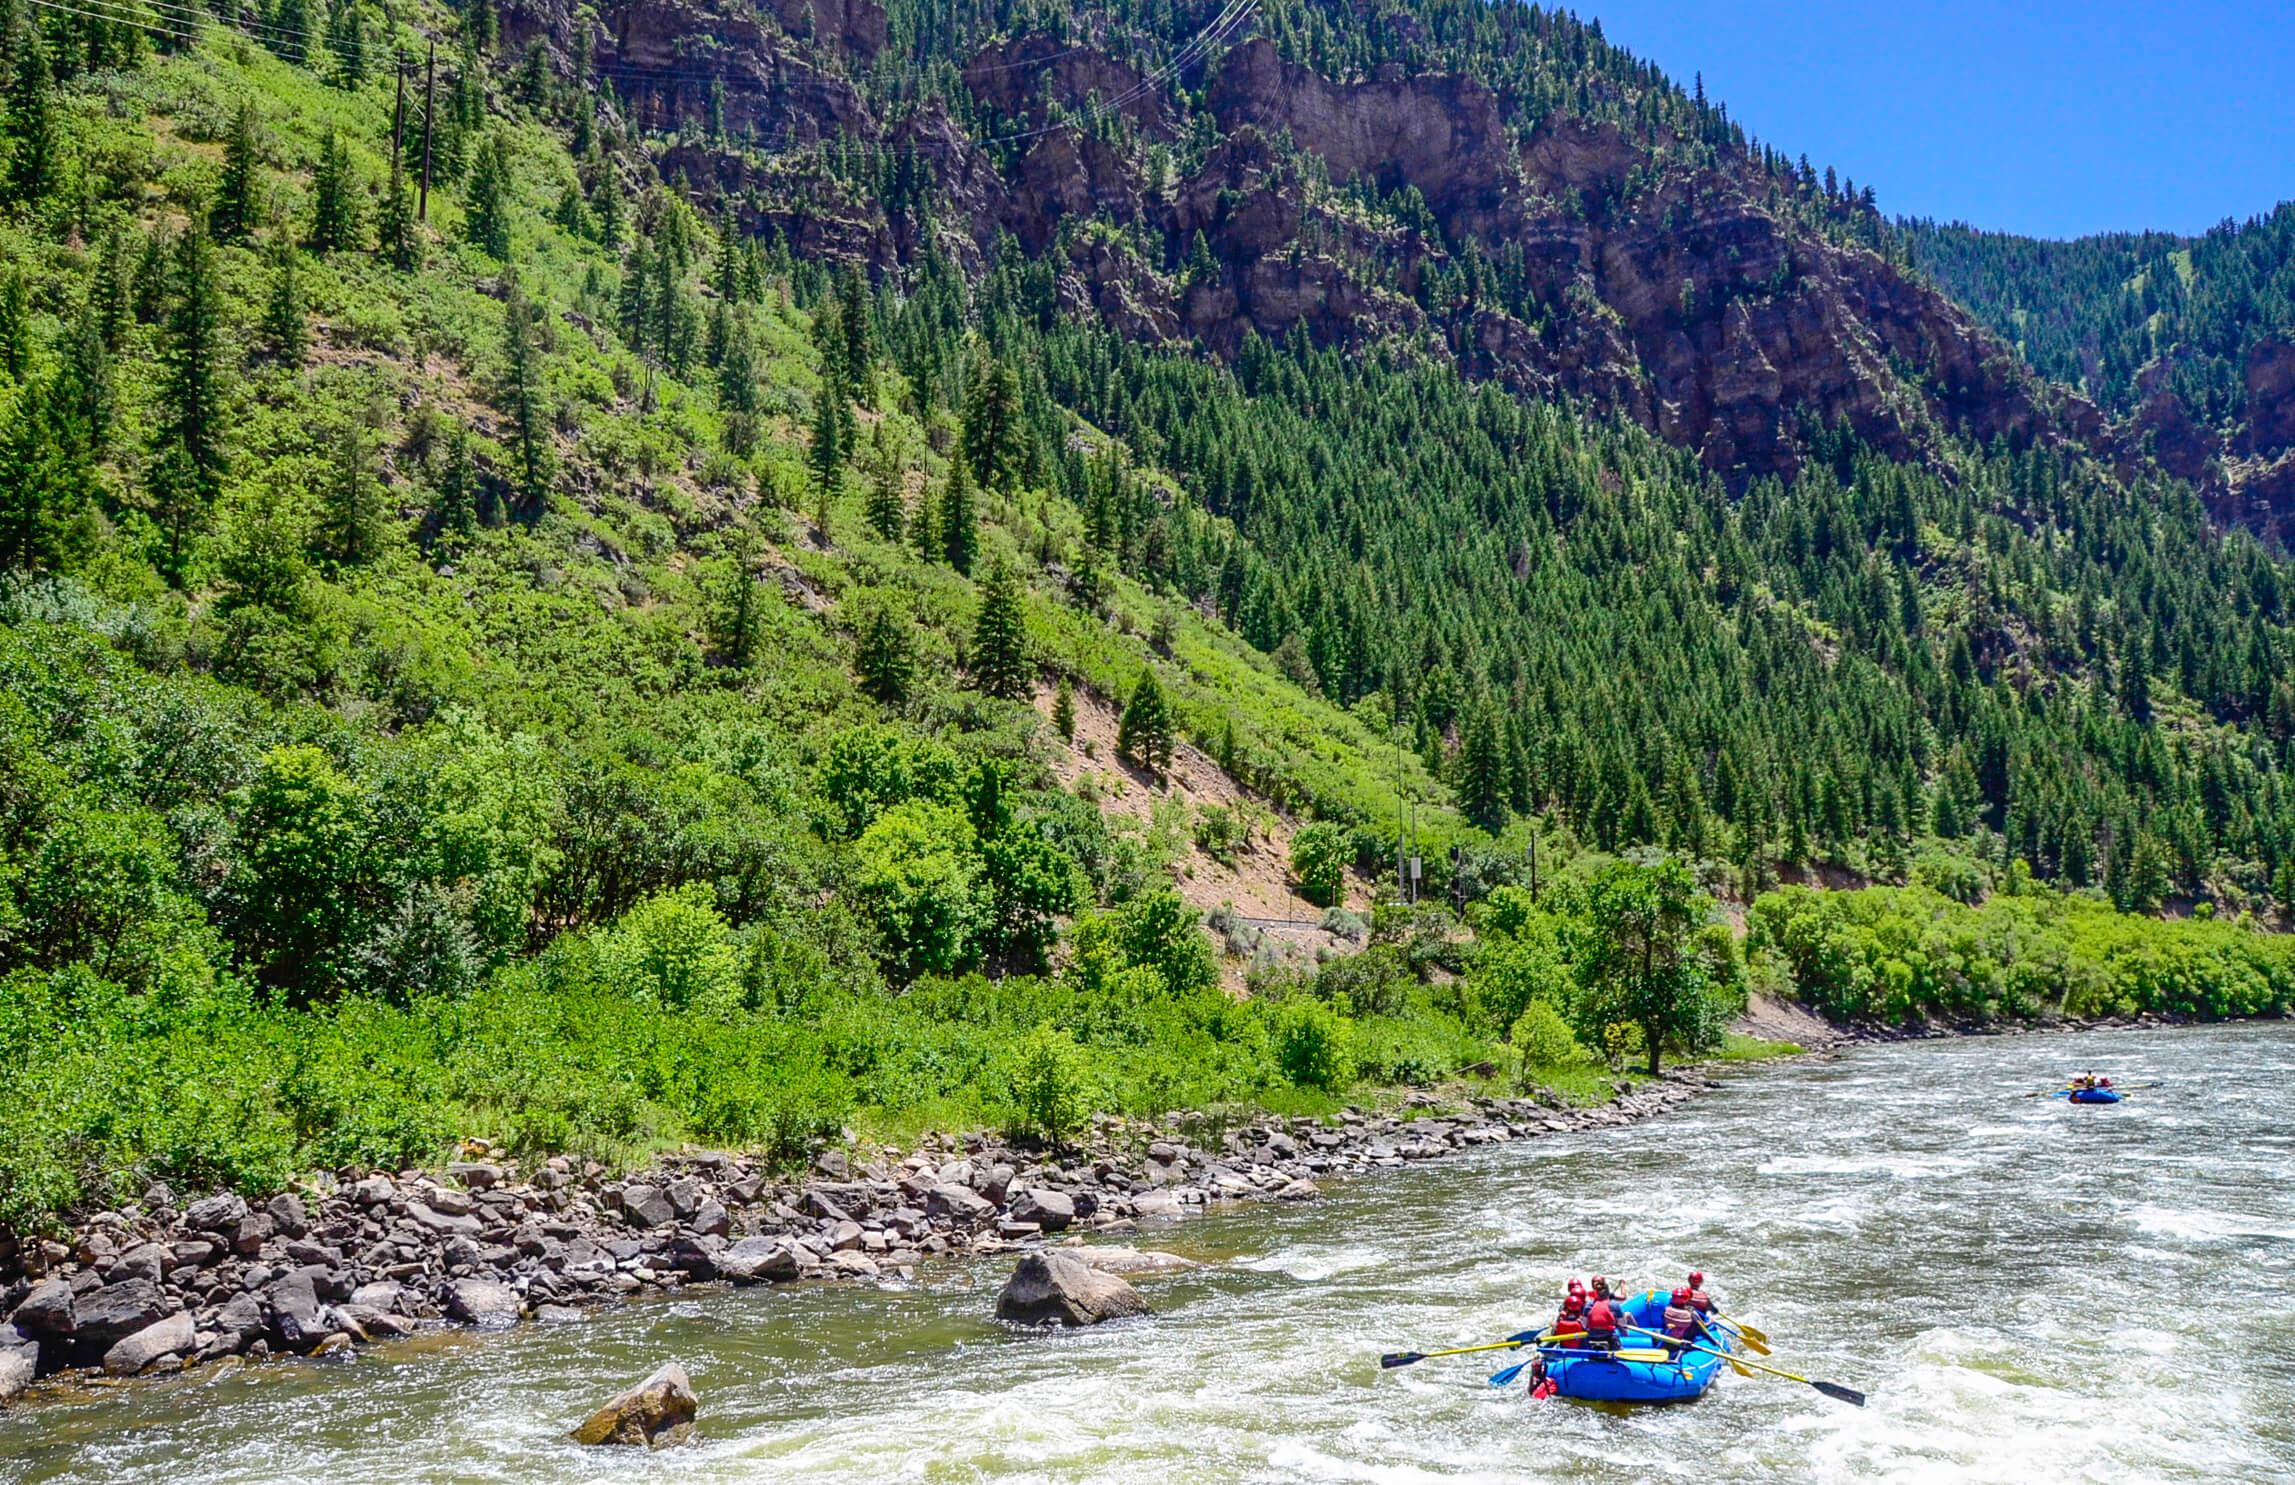 An image of a boat of rafters on the Colorado River with the beautiful green trees and rocky mountainside of Glenwood Canyon in the background.